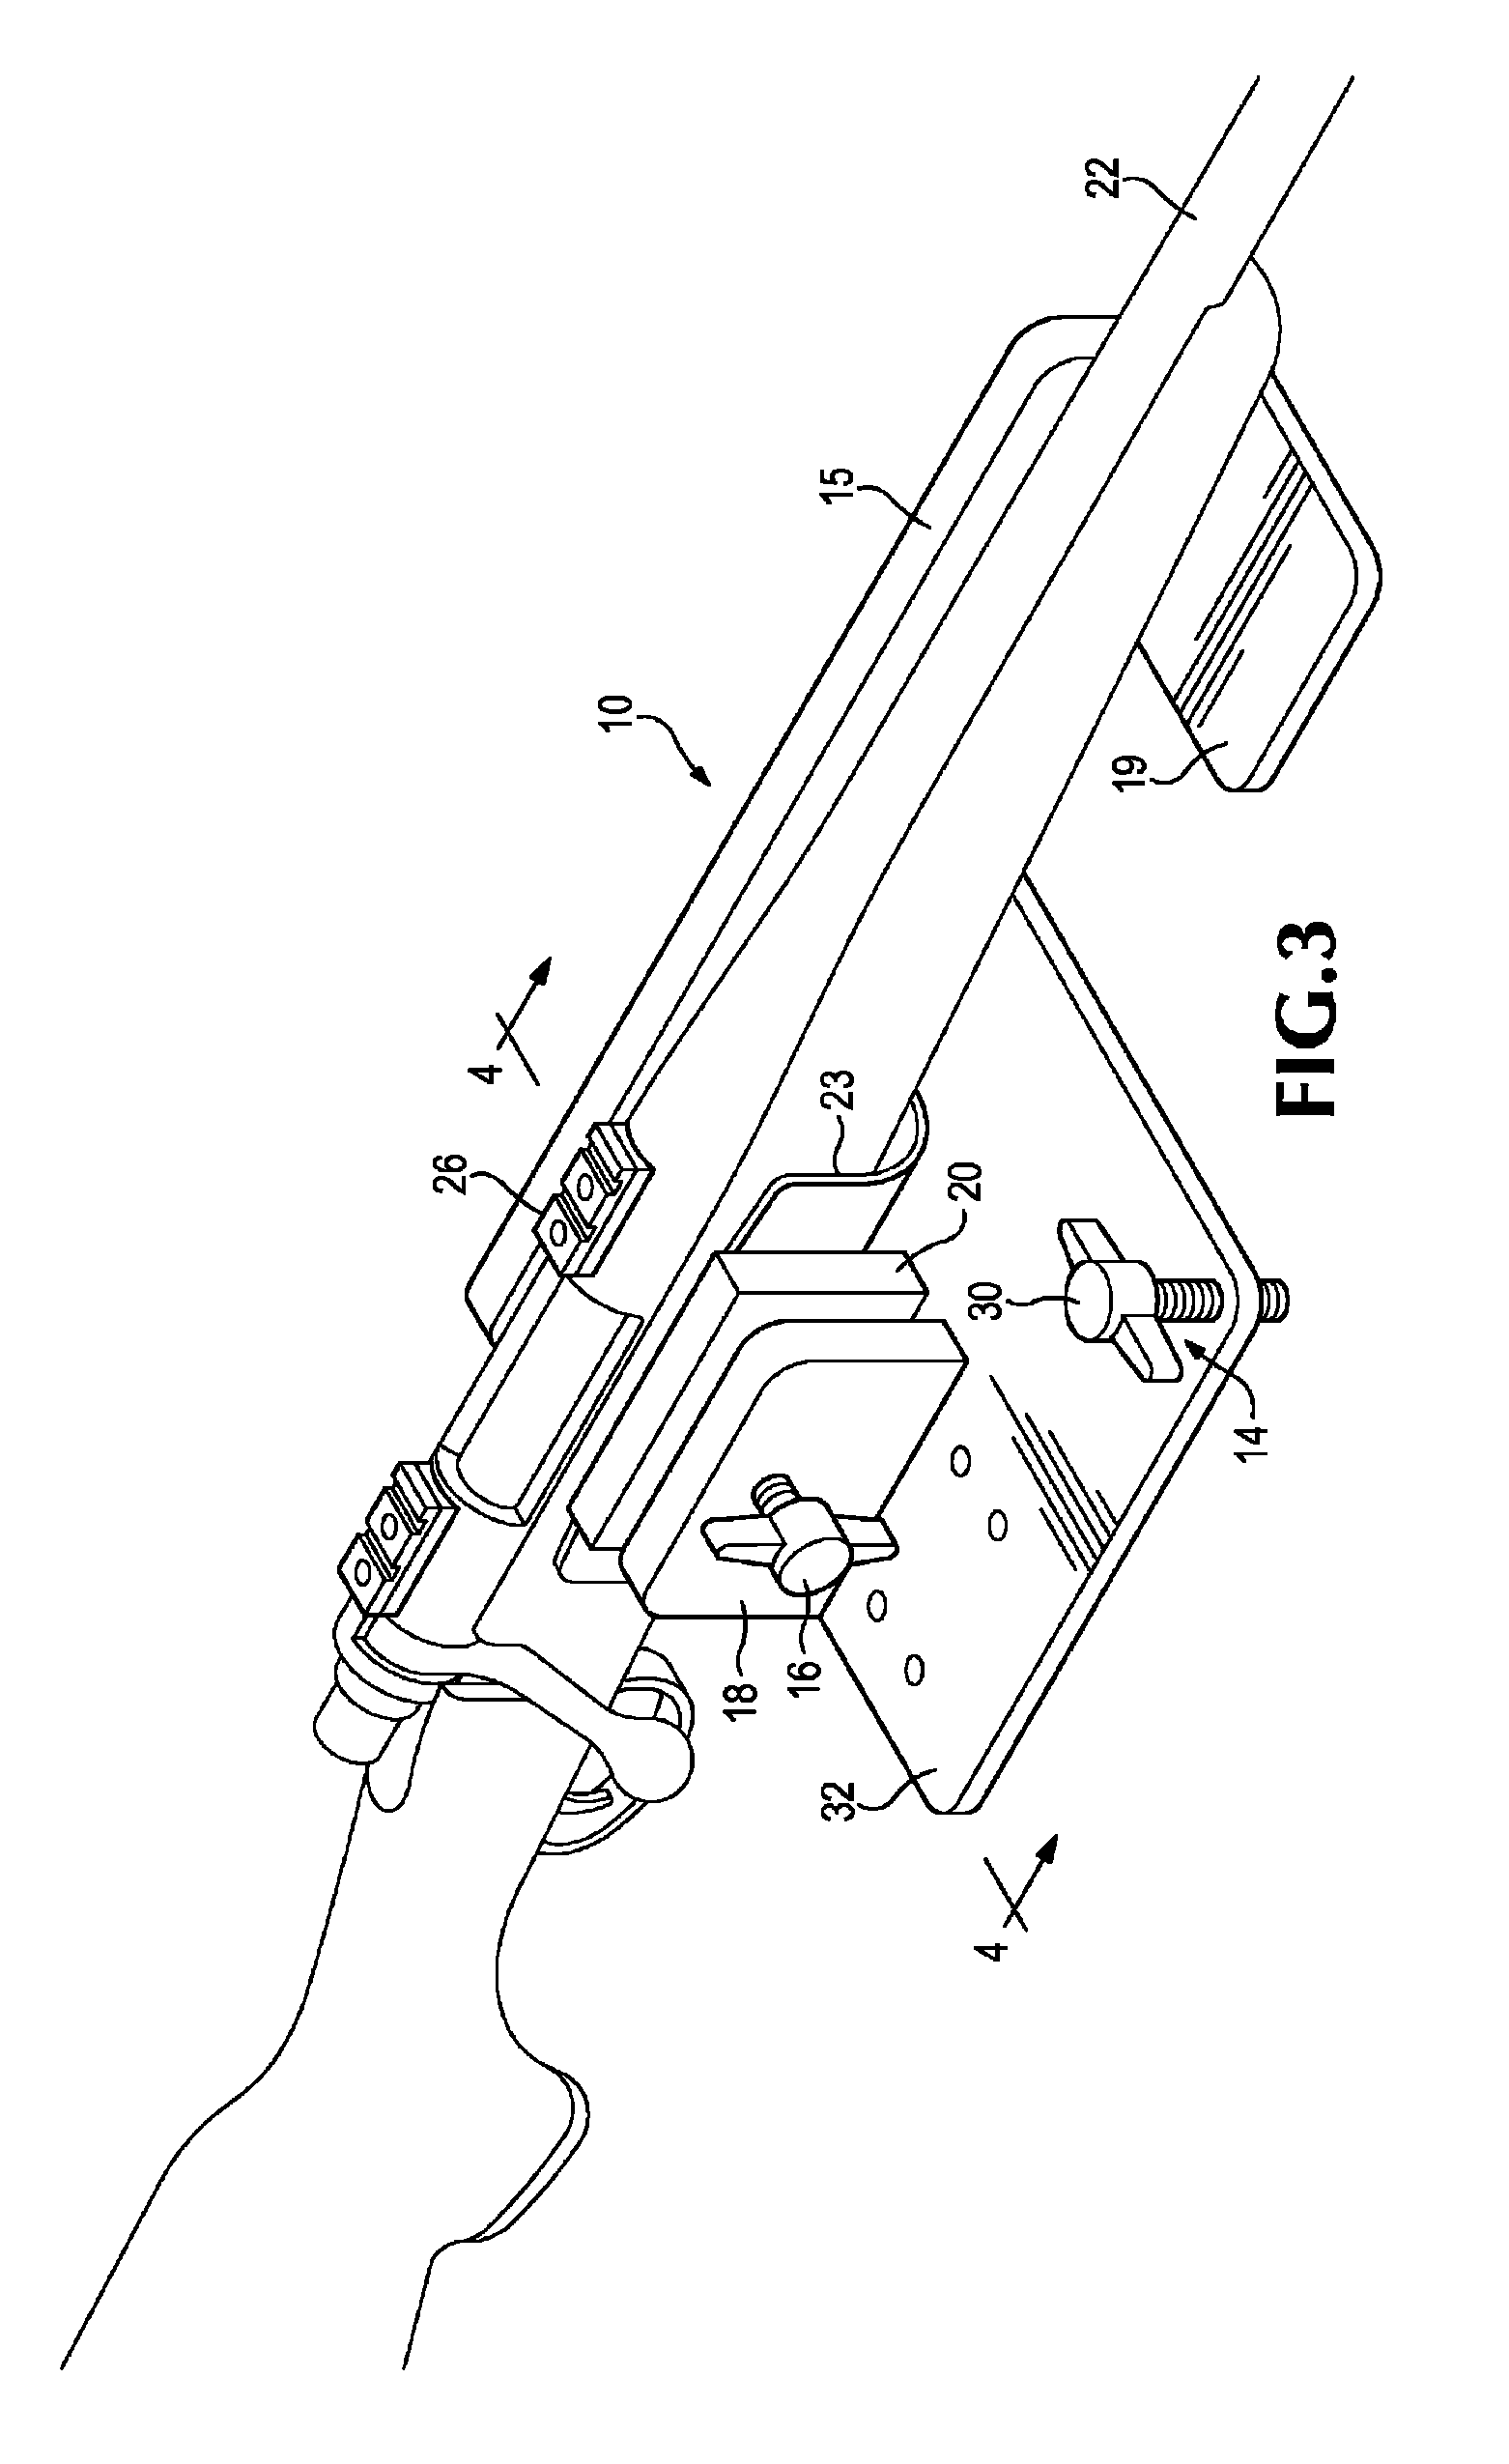 Rifle scope installation fixture and method of use